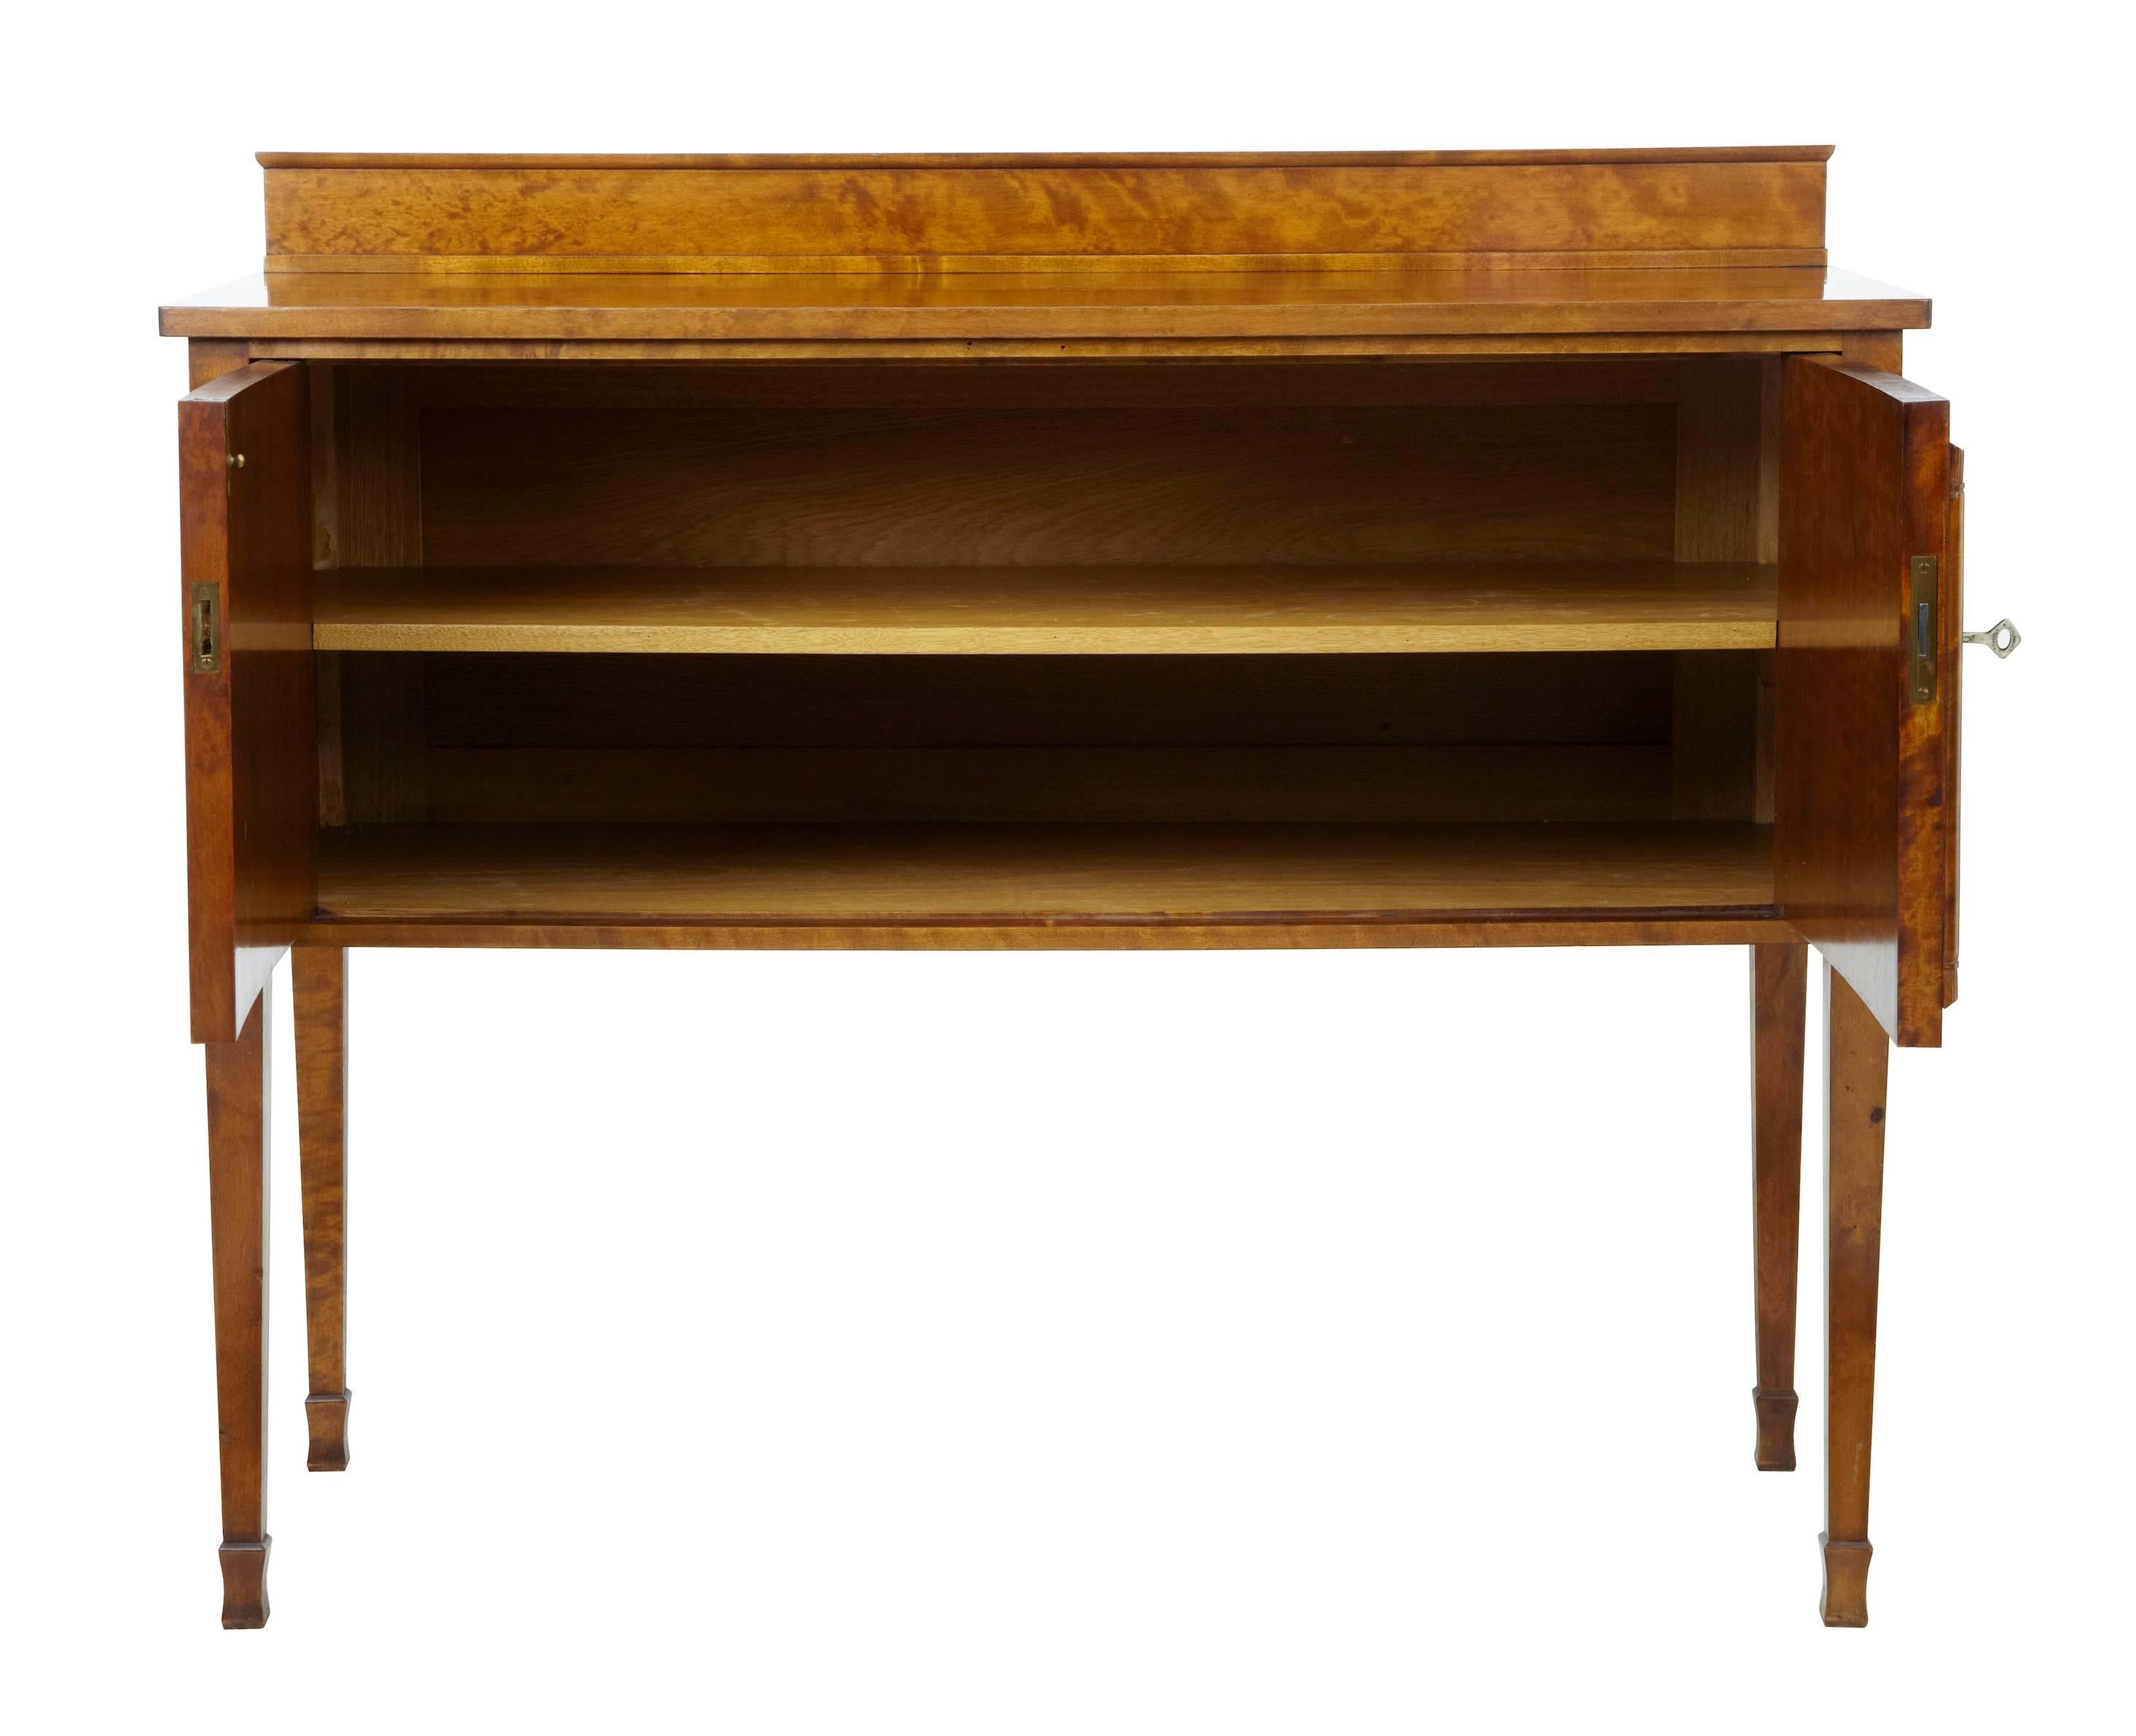 Art Deco period birch sideboard, circa 1930.
Top with small gallery back.
Double doors open to reveal a single full width shelf.
Carved roundel details to door fronts.

Measures: Height 36 3/4